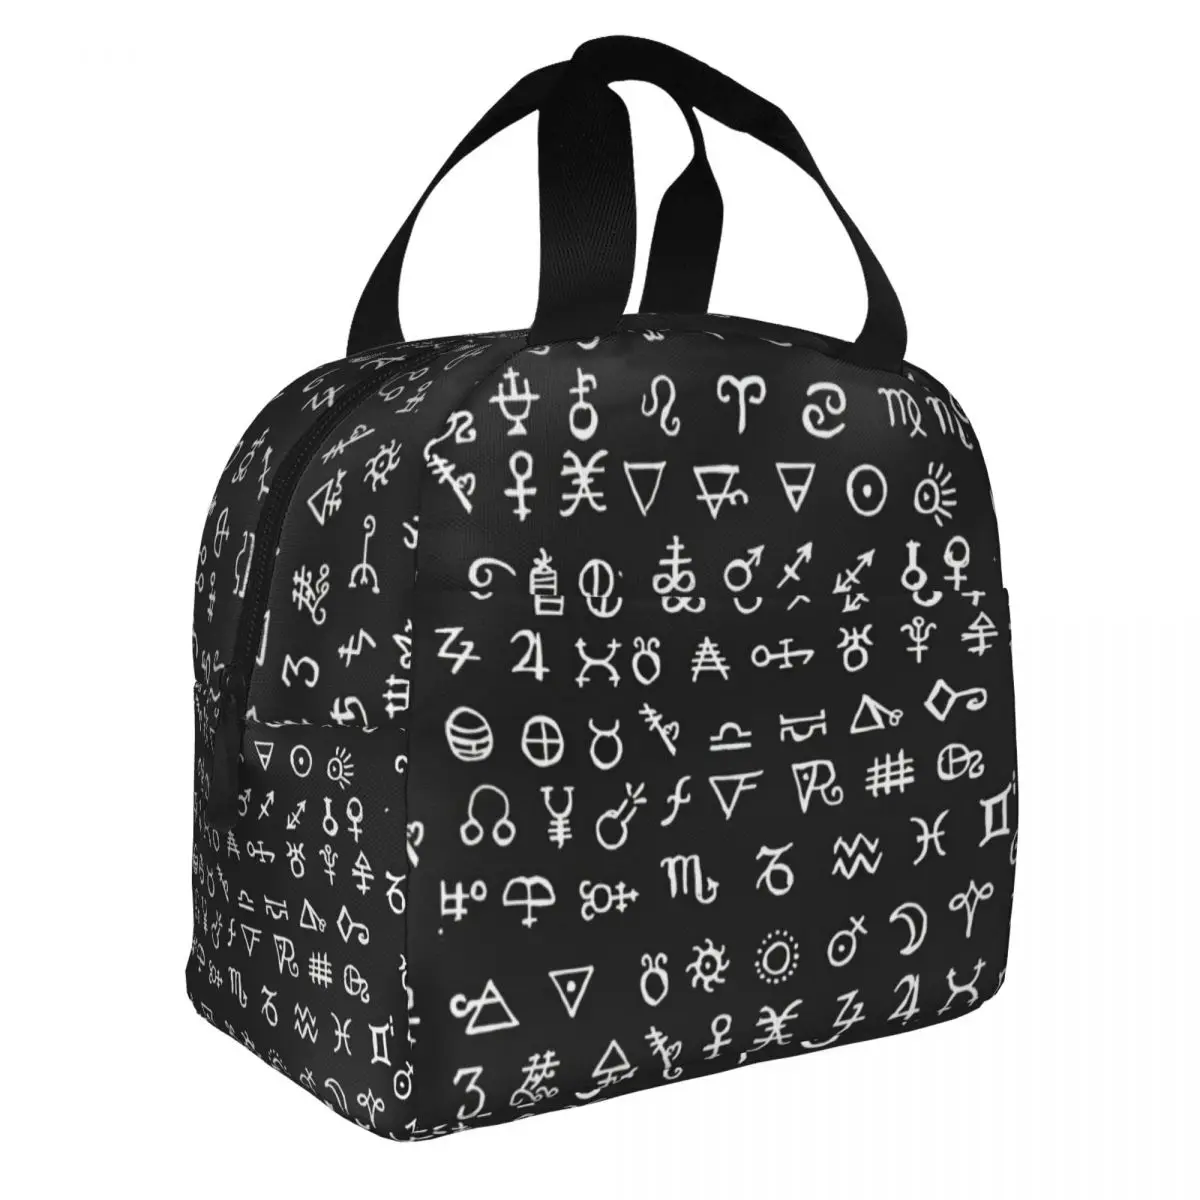 Alchemy Symbols Lunch Bento Bags Portable Aluminum Foil thickened Thermal Cloth Lunch Bag for Women Men Boy